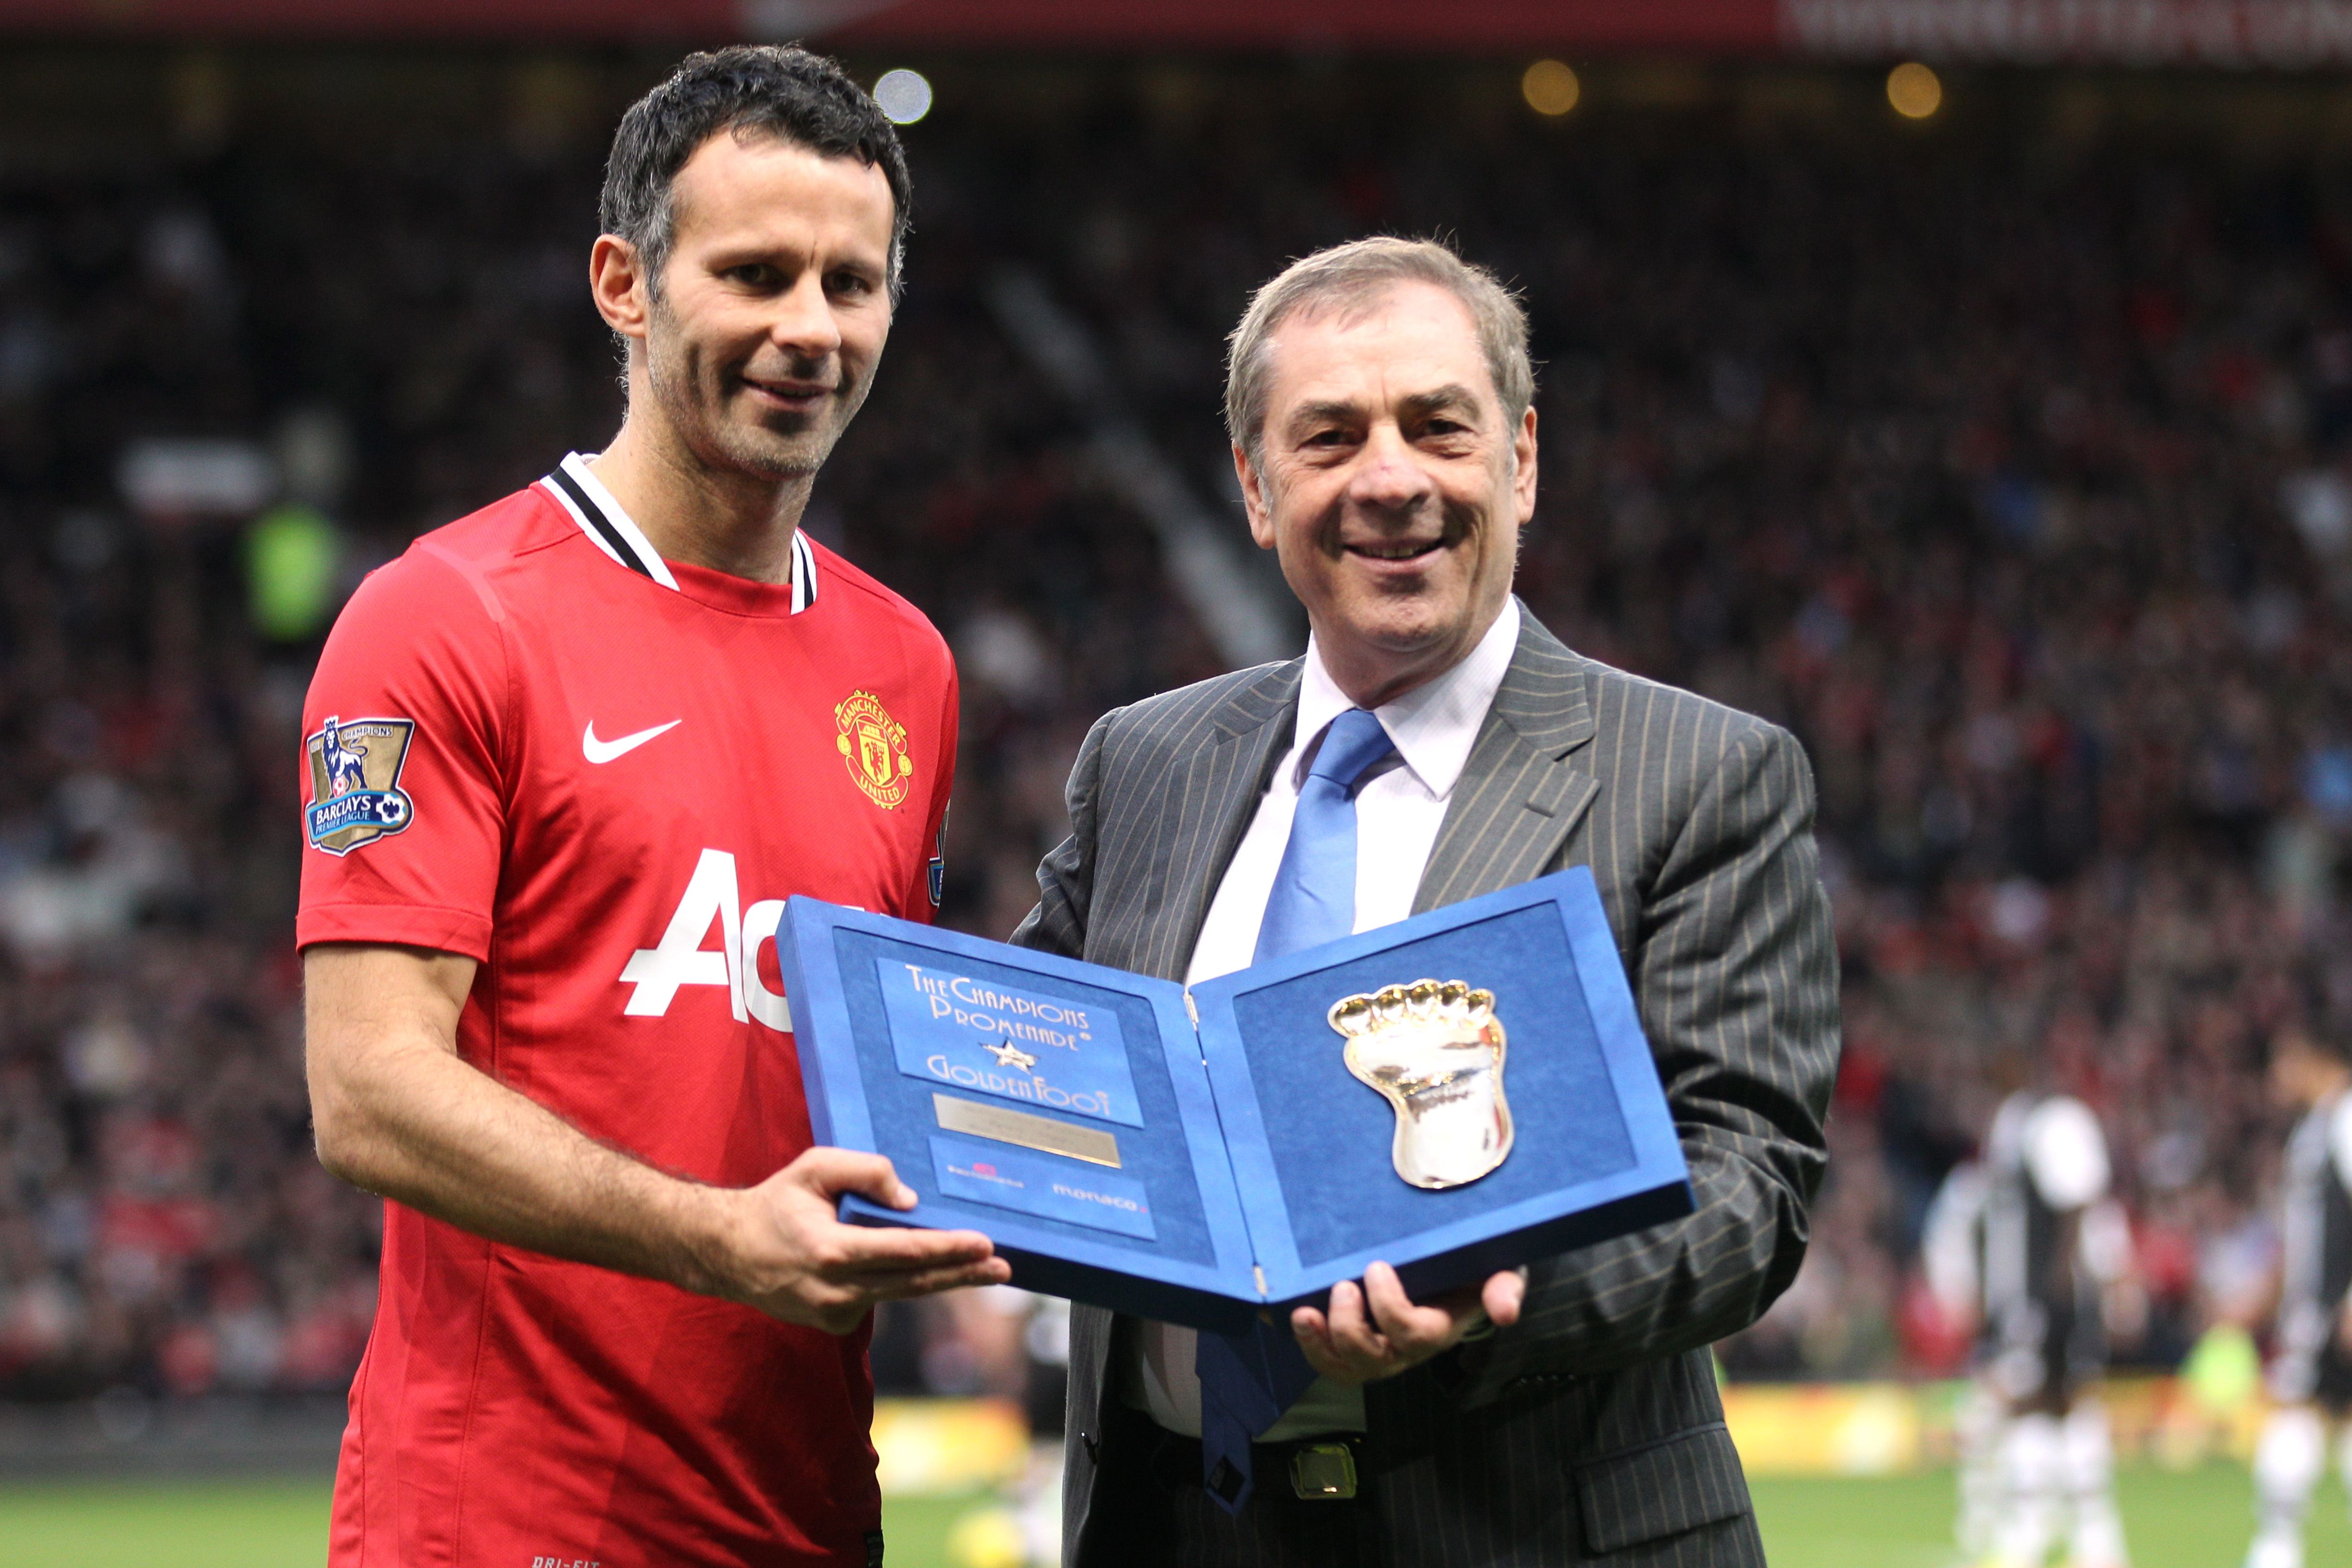 Ryan Giggs with the Golden Foot Award